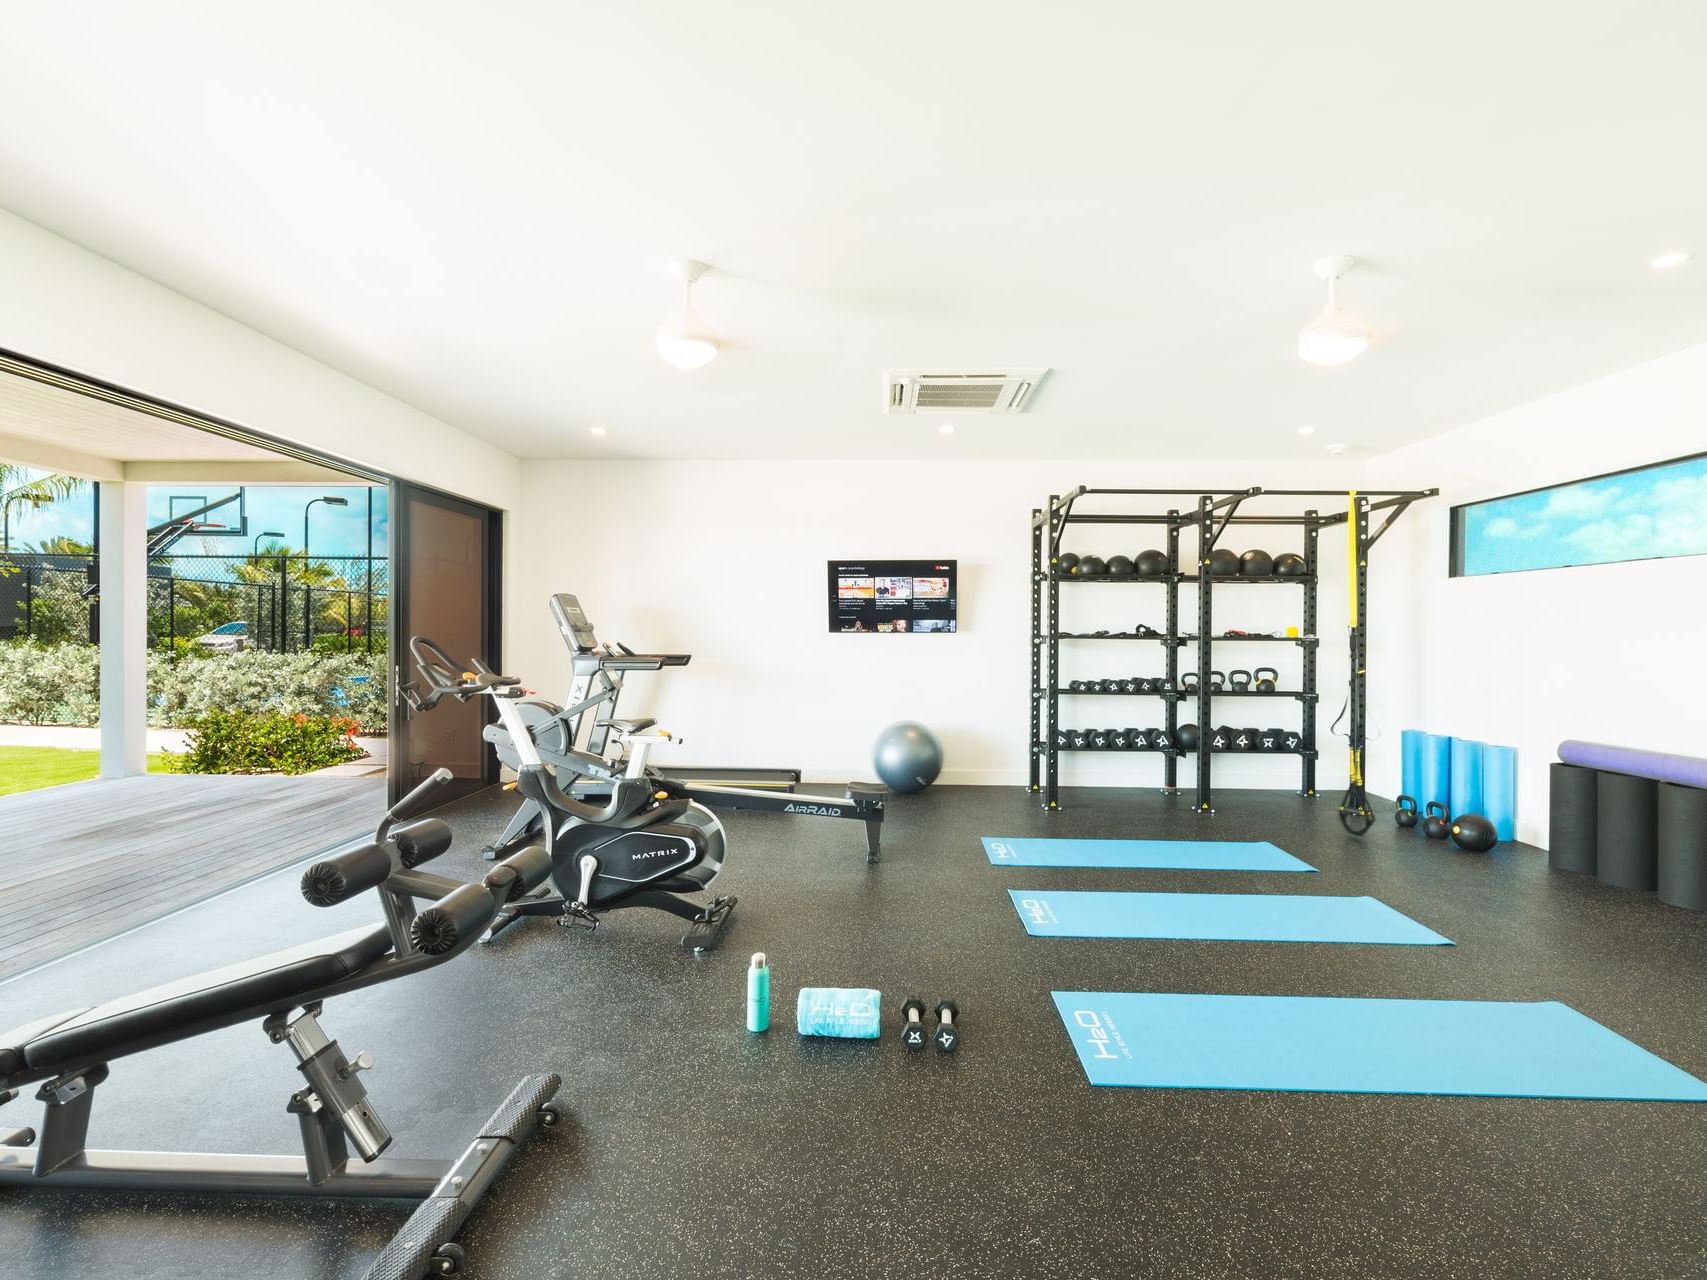 Exercise machines & yoga mats in the gym, H2O Life Style Resort